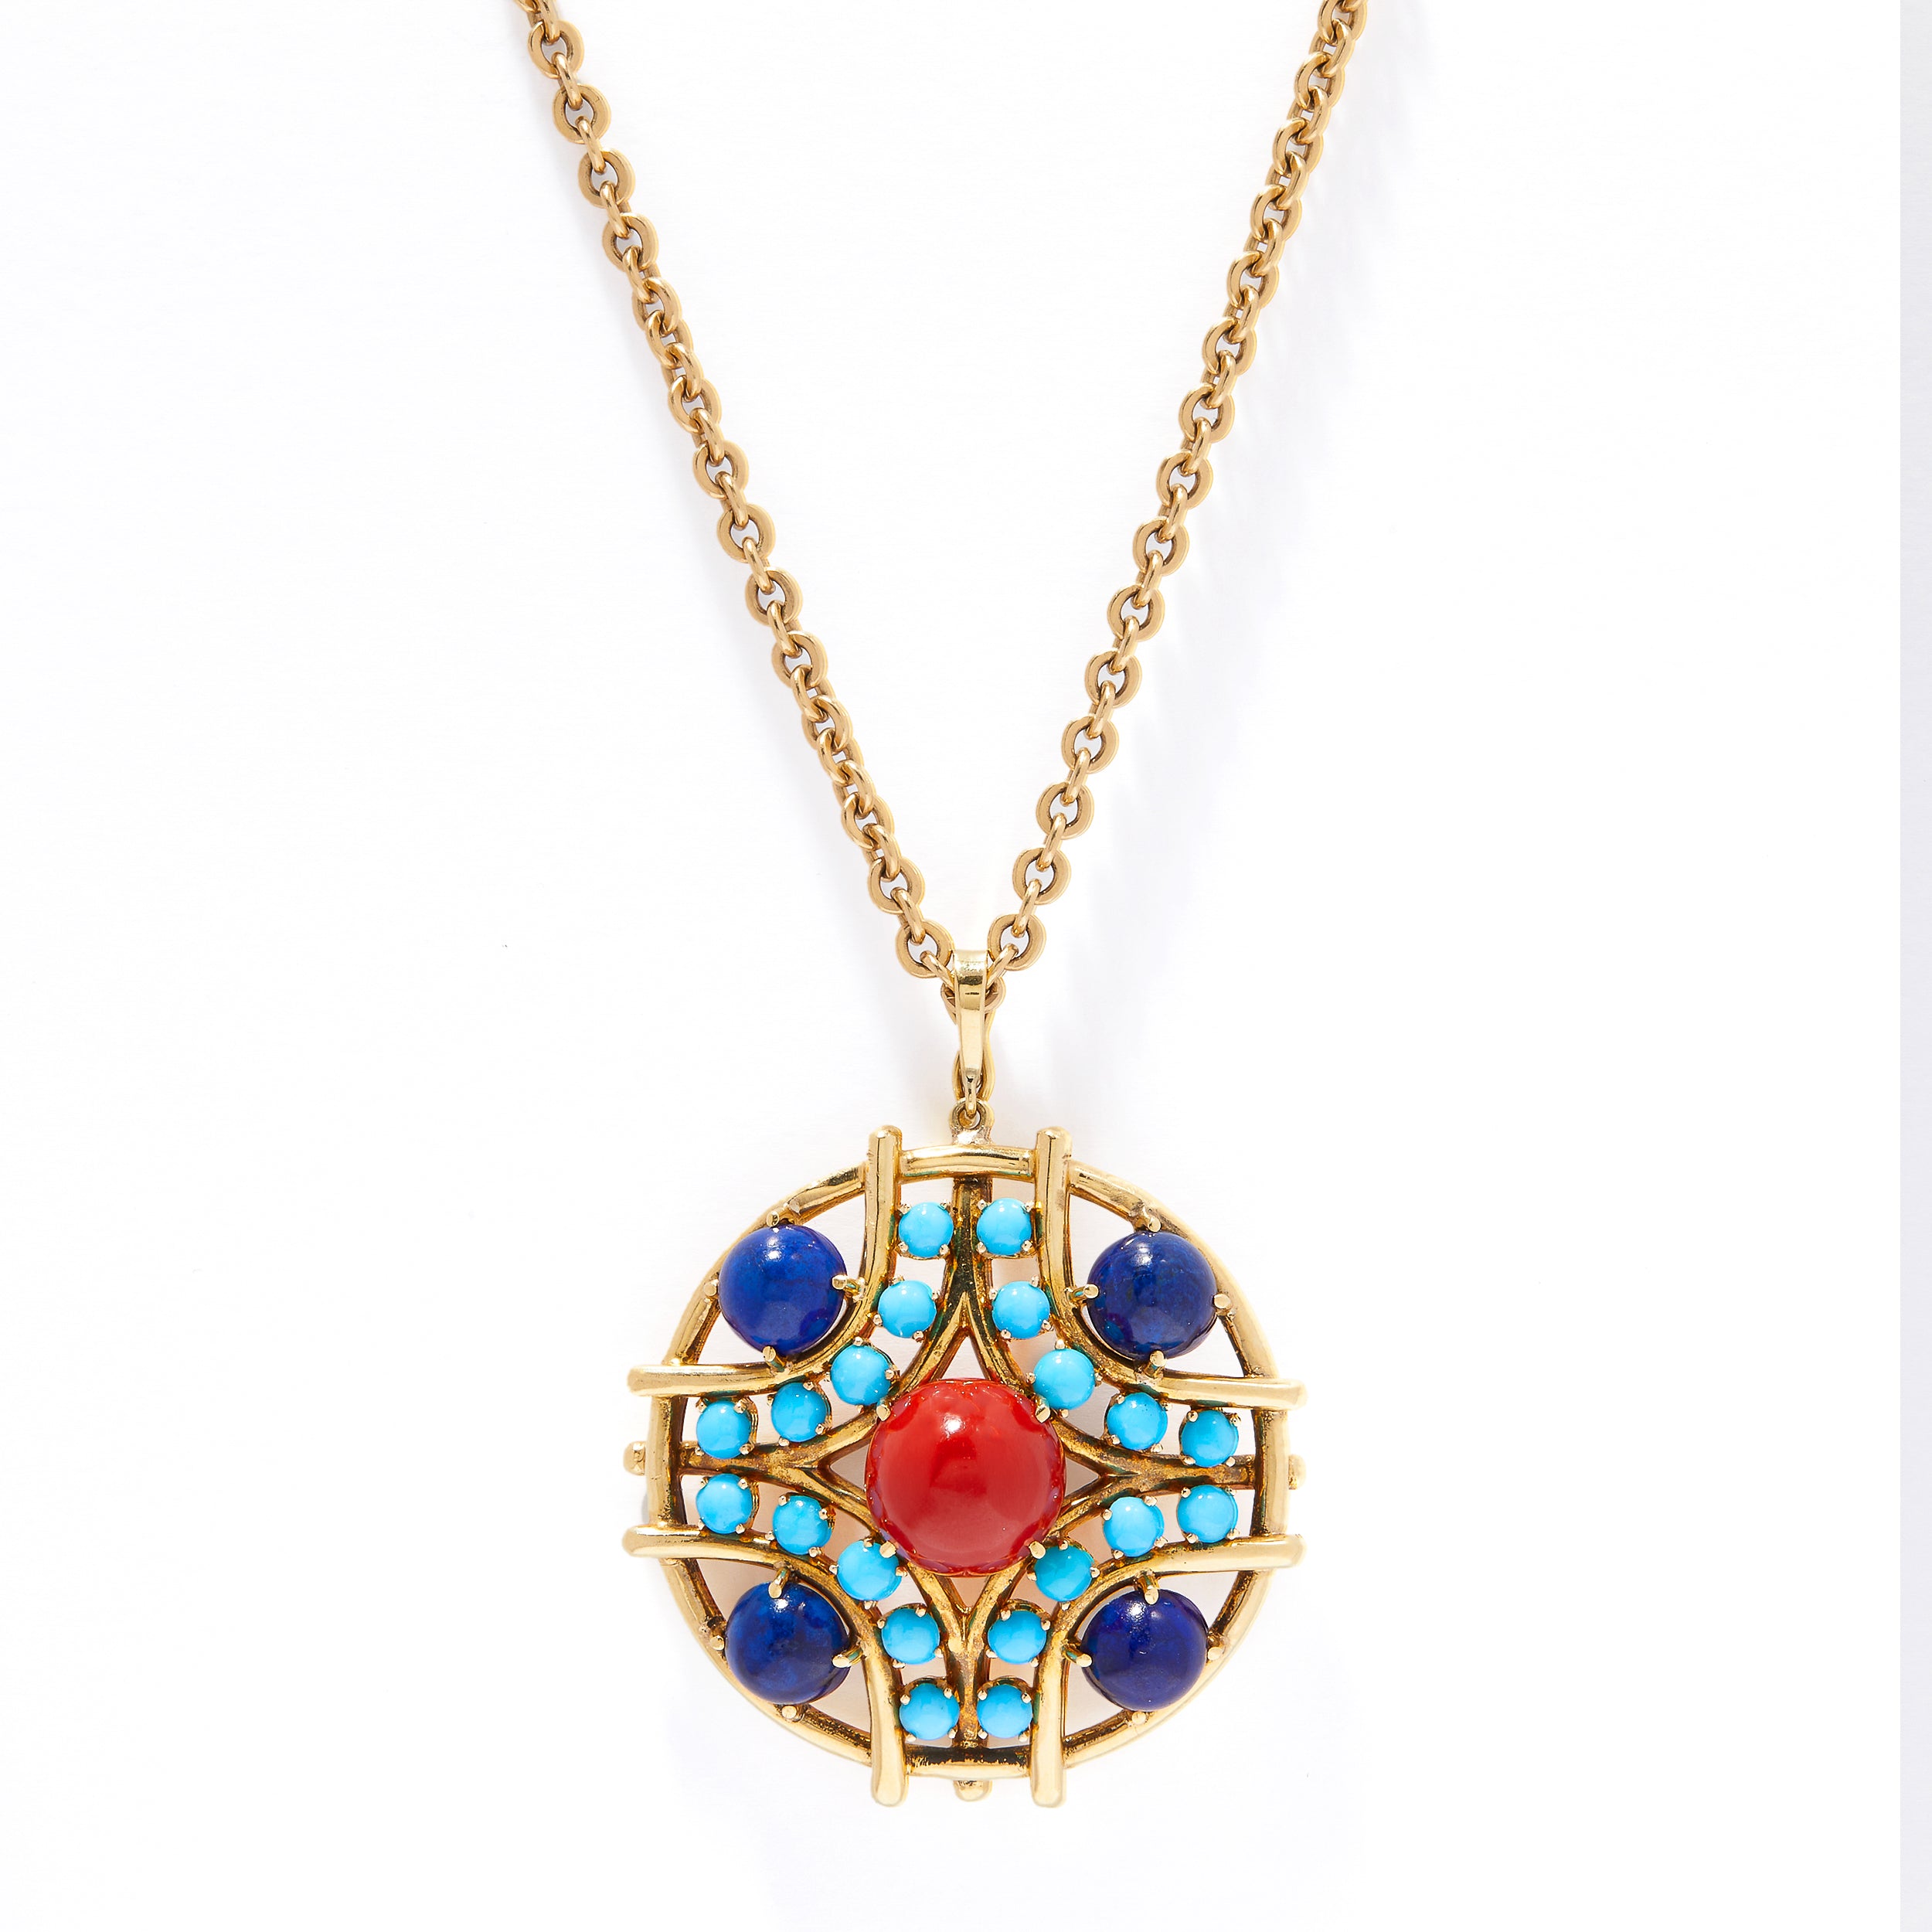  Colourful gold medallion necklace from the vintage collection of Saks Fifth Avenue.